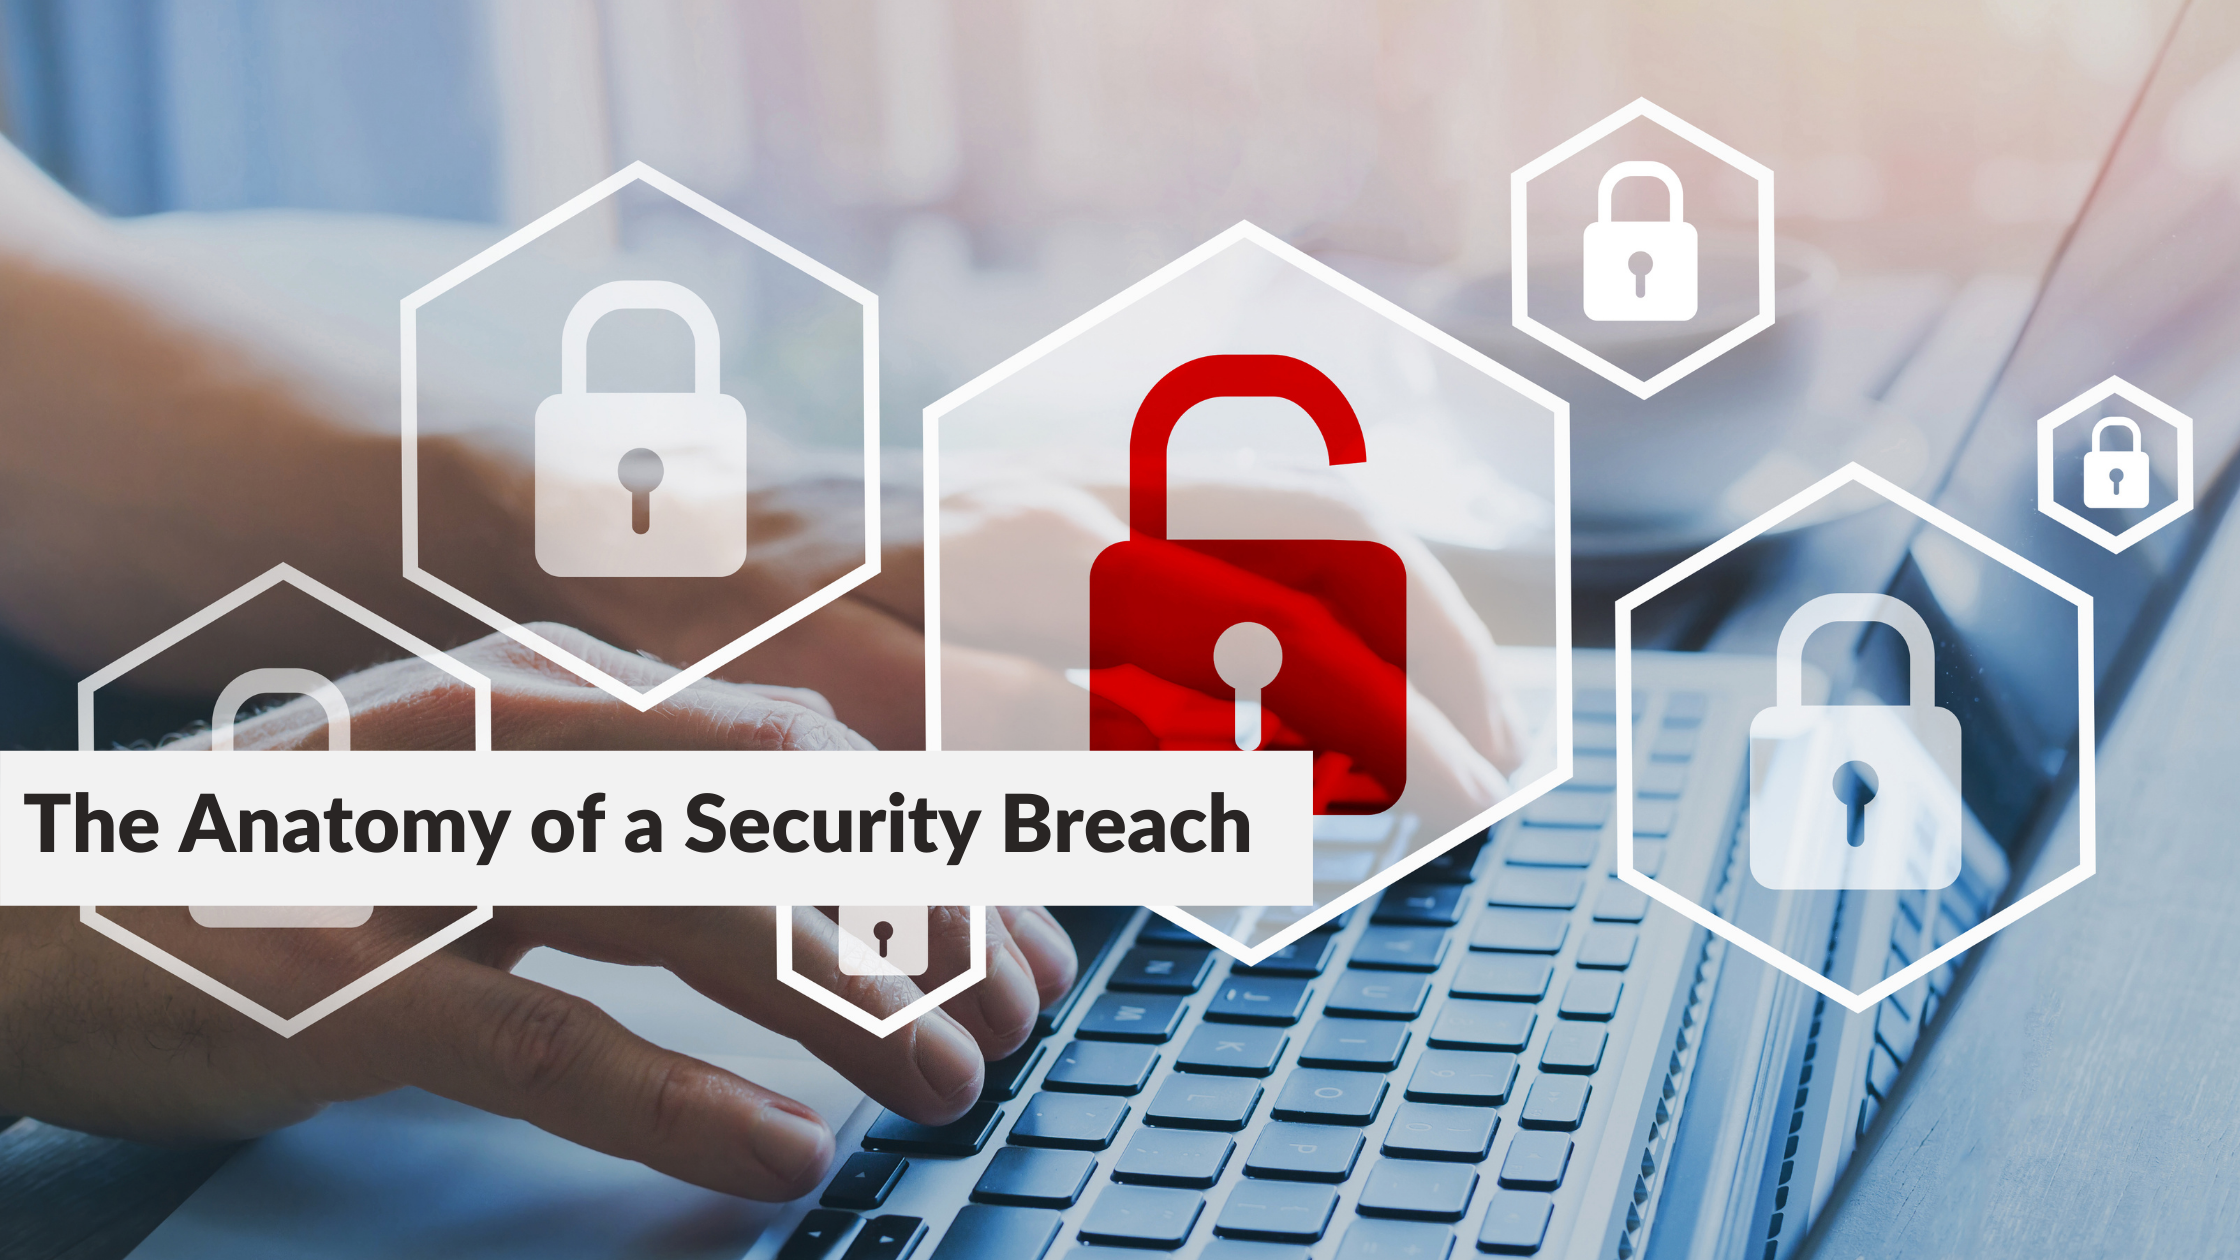 The Anatomy of a Security Breach